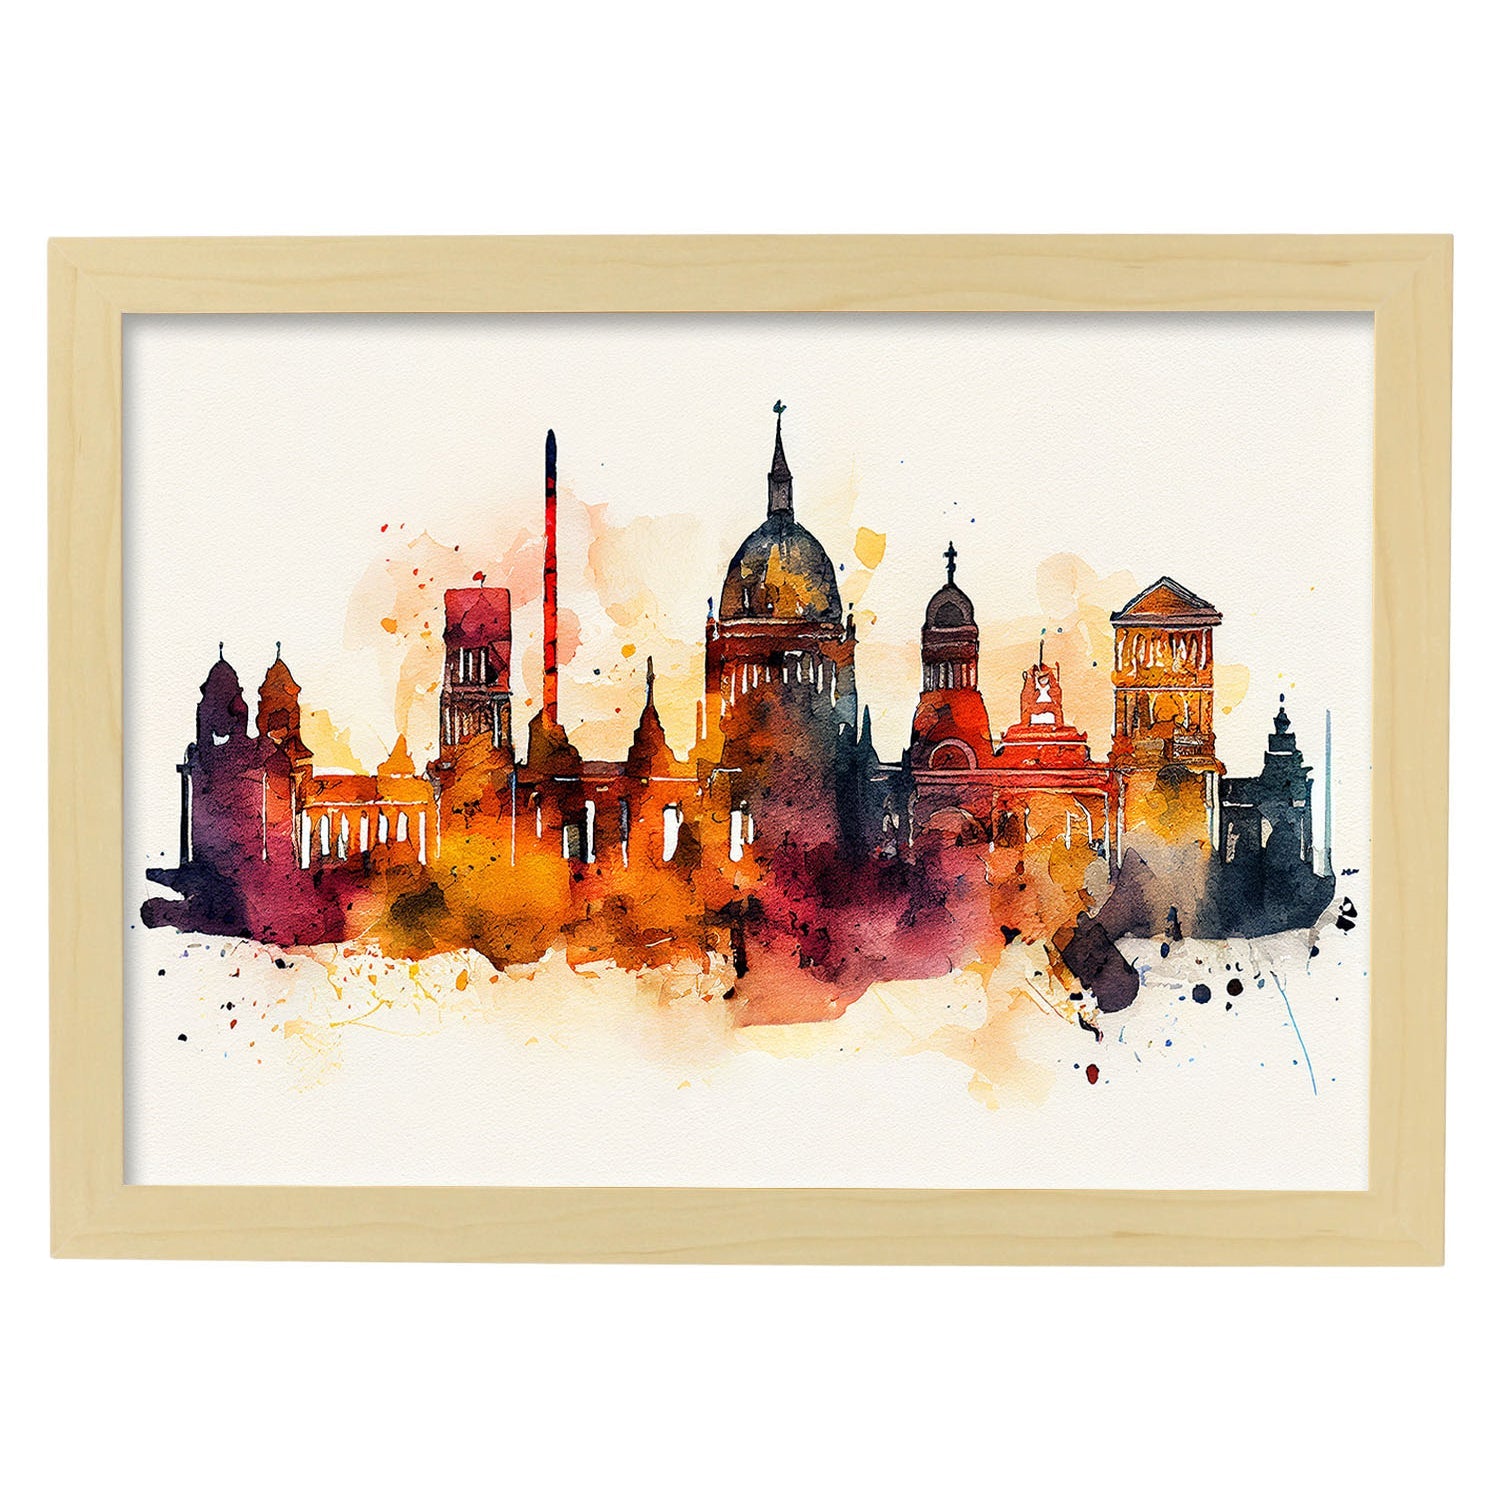 Nacnic watercolor of a skyline of the city of Berlin_1. Aesthetic Wall Art Prints for Bedroom or Living Room Design.-Artwork-Nacnic-A4-Marco Madera Clara-Nacnic Estudio SL